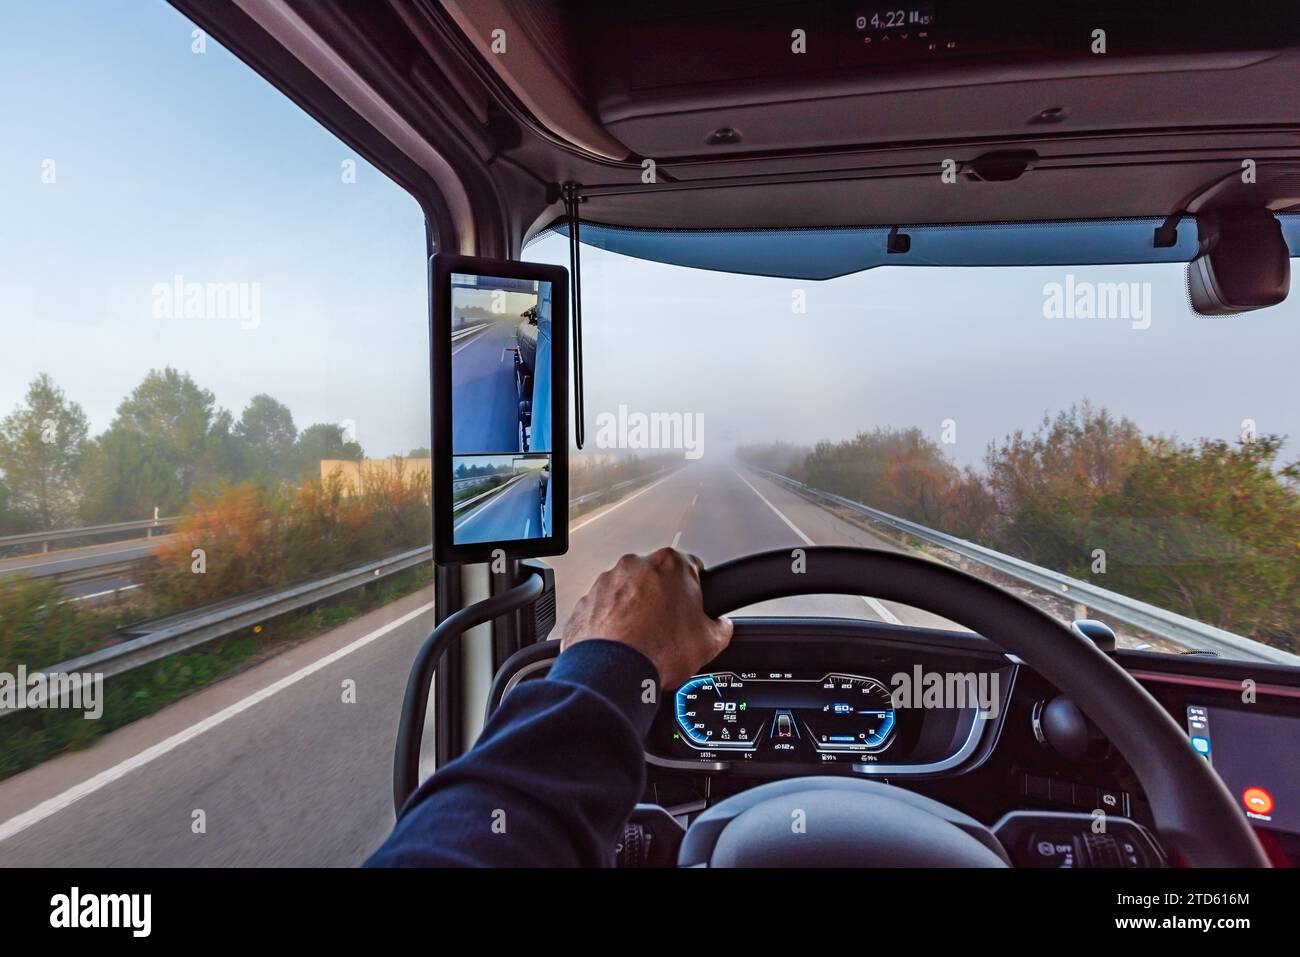 View from the inside of the cabin of a truck on a highway with fog. Stock Photo